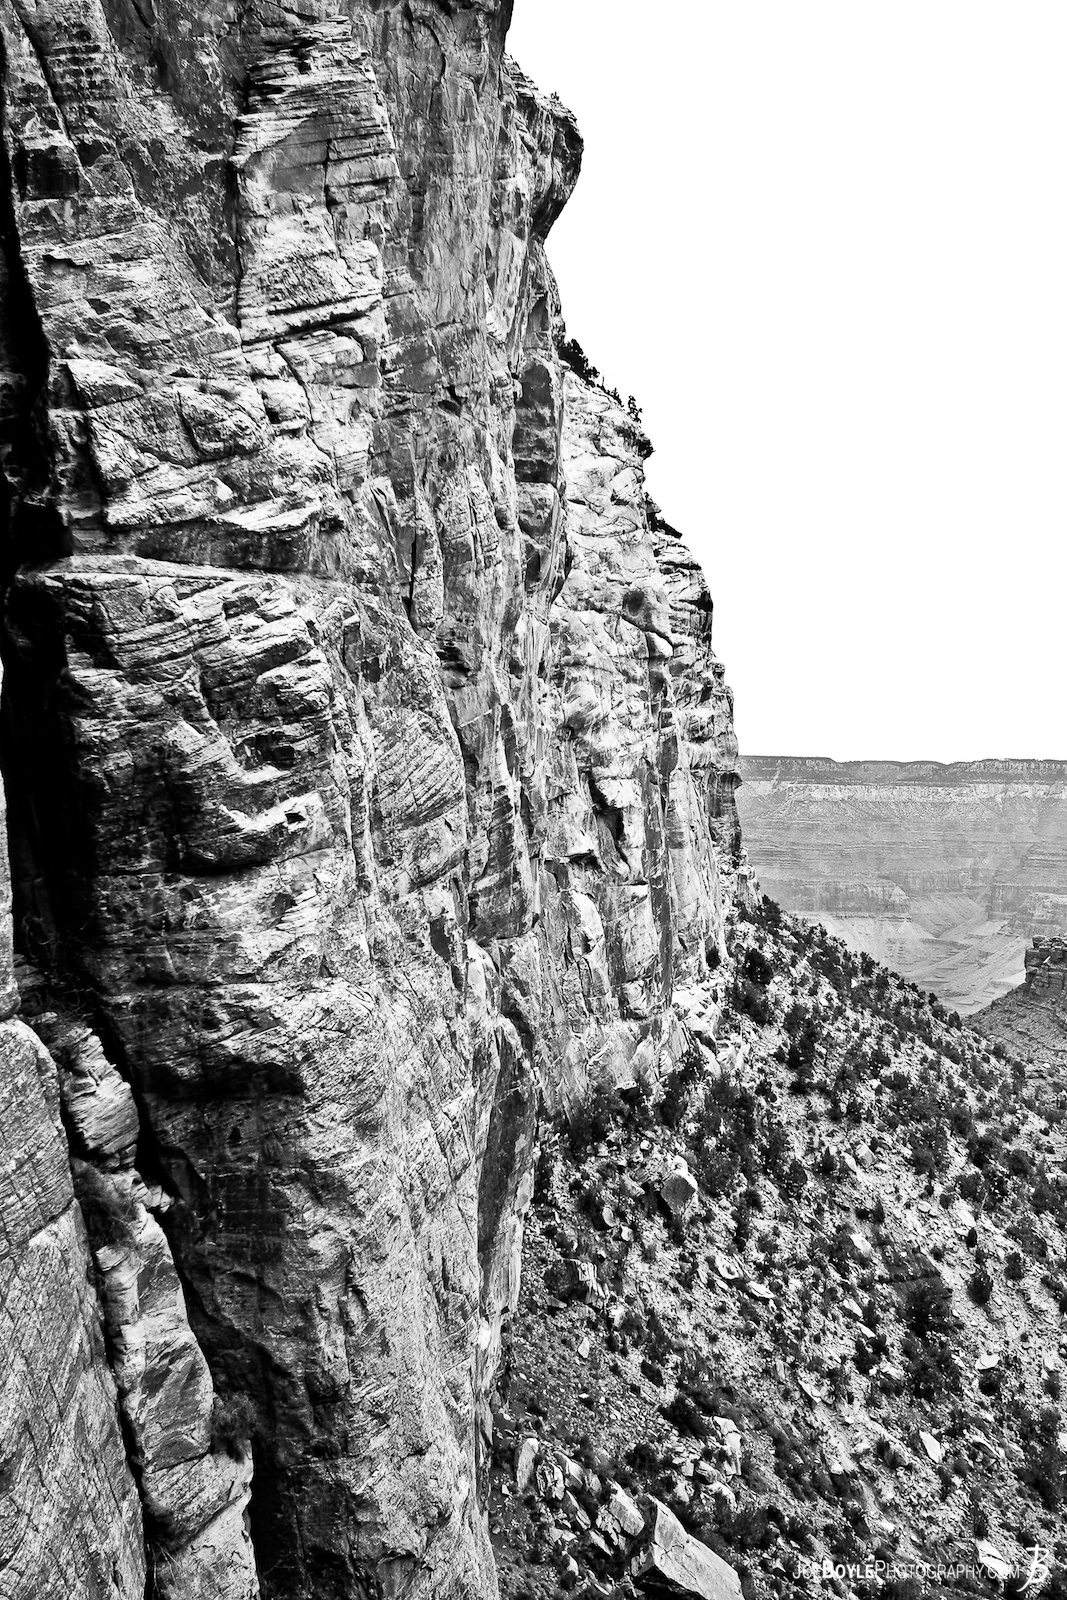  This is an image of one of the steep mountain walls in the Grand Canyon. 